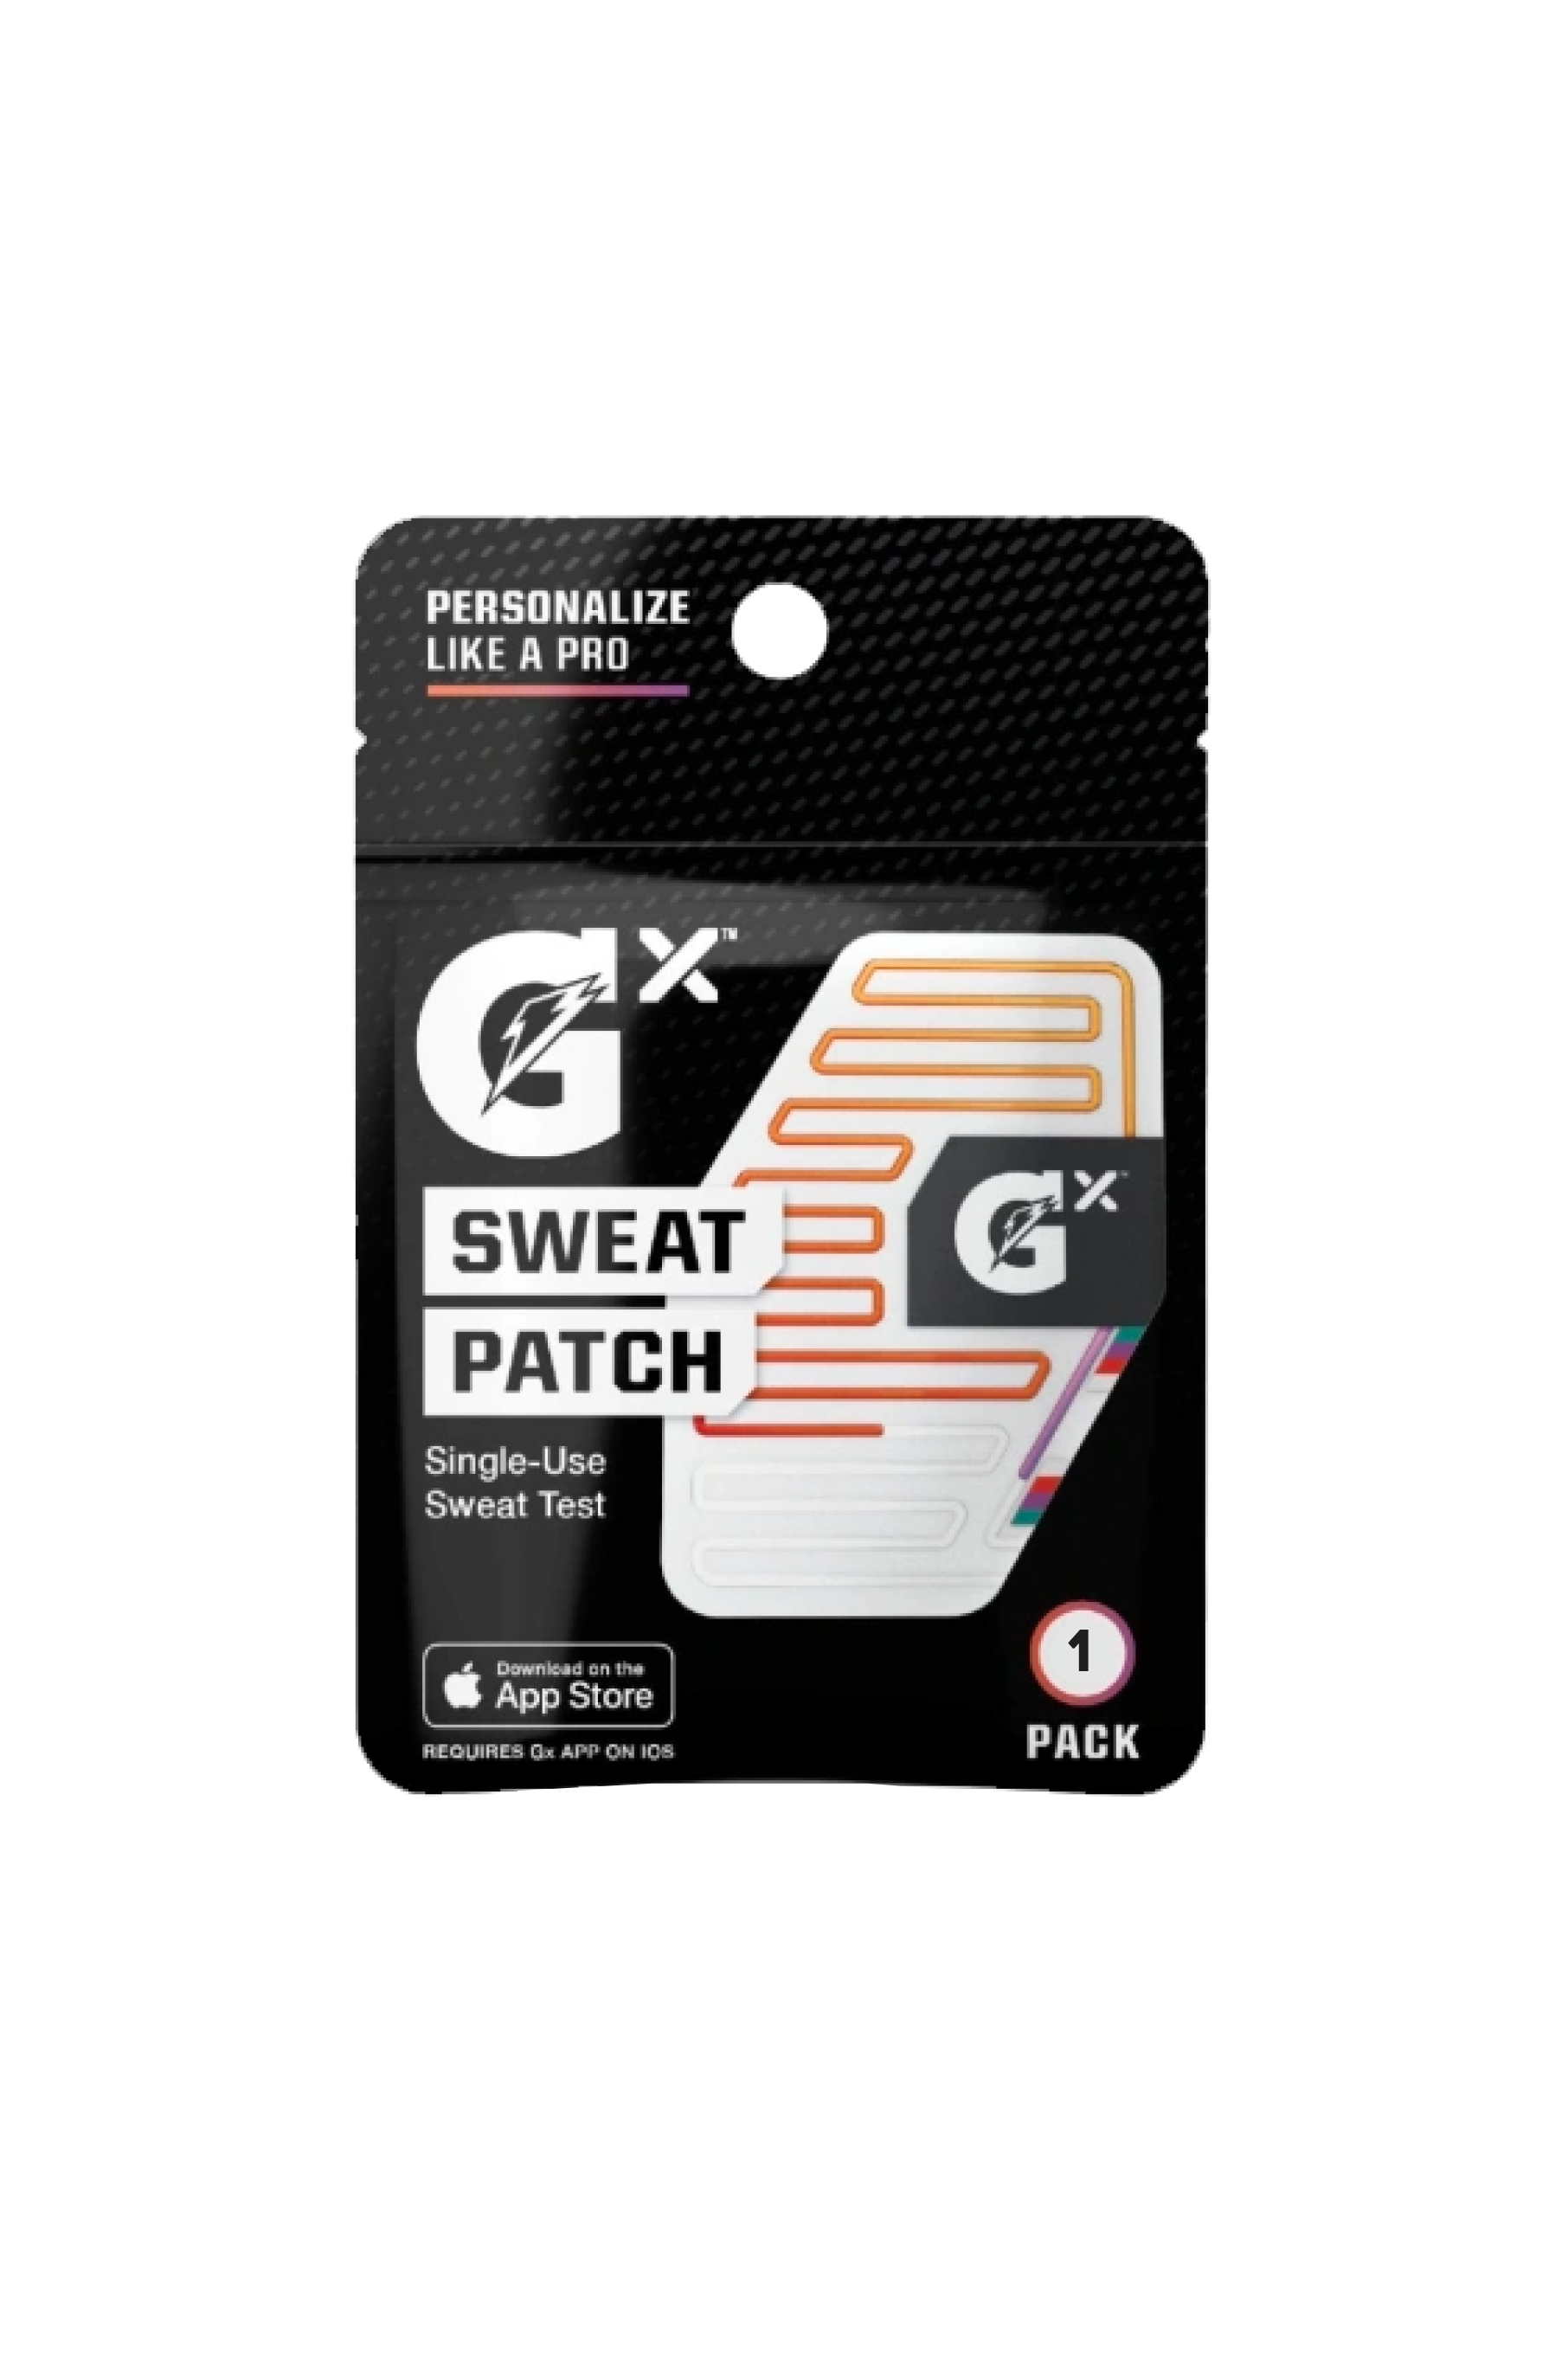 Single count sweat patch packaging.